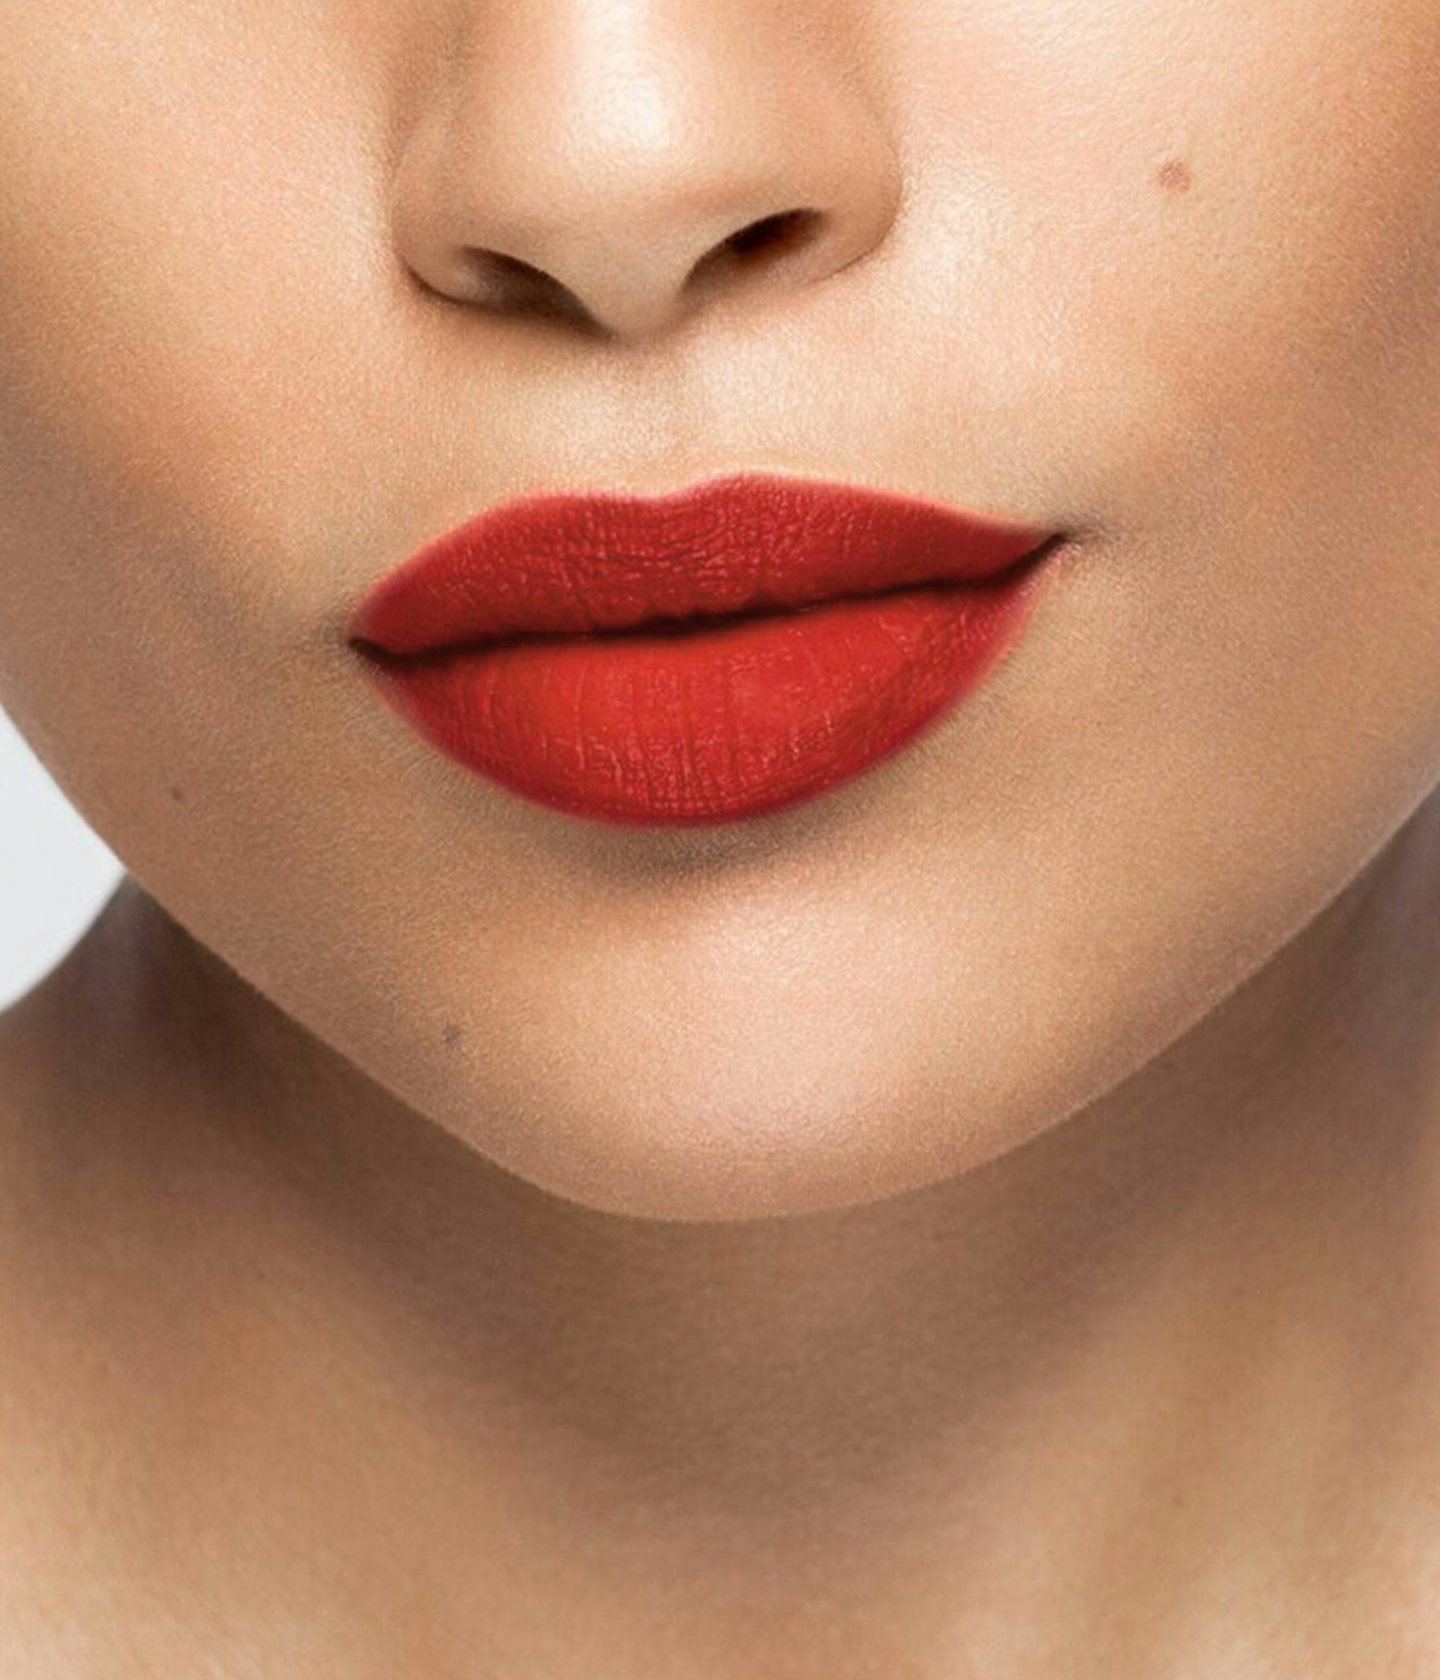 La bouche rouge The Red Andreea lipstick shade on the lips of an medium skin model